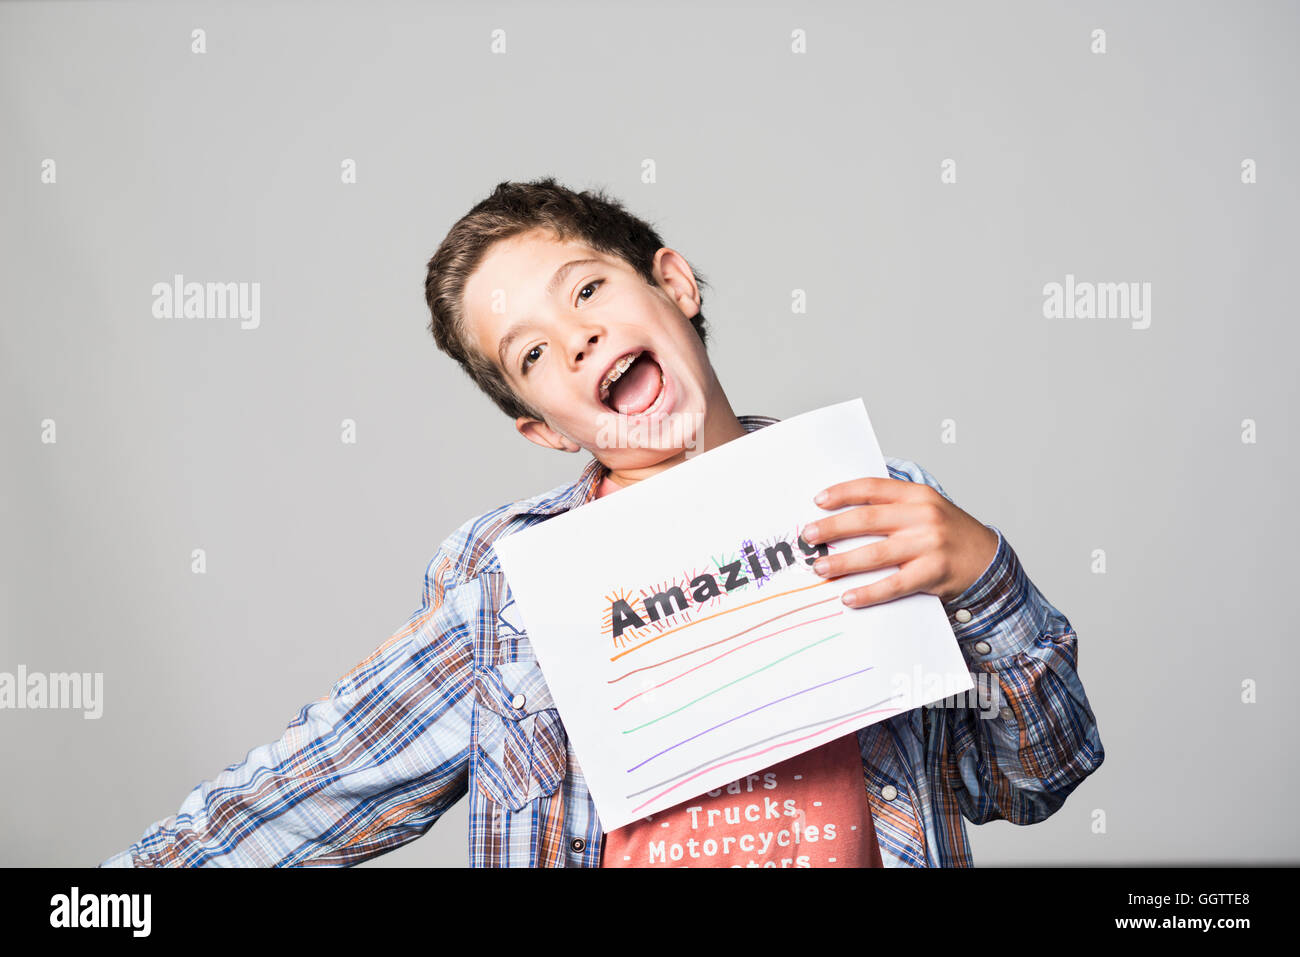 Proud Mixed Race boy holding awesome sign Stock Photo